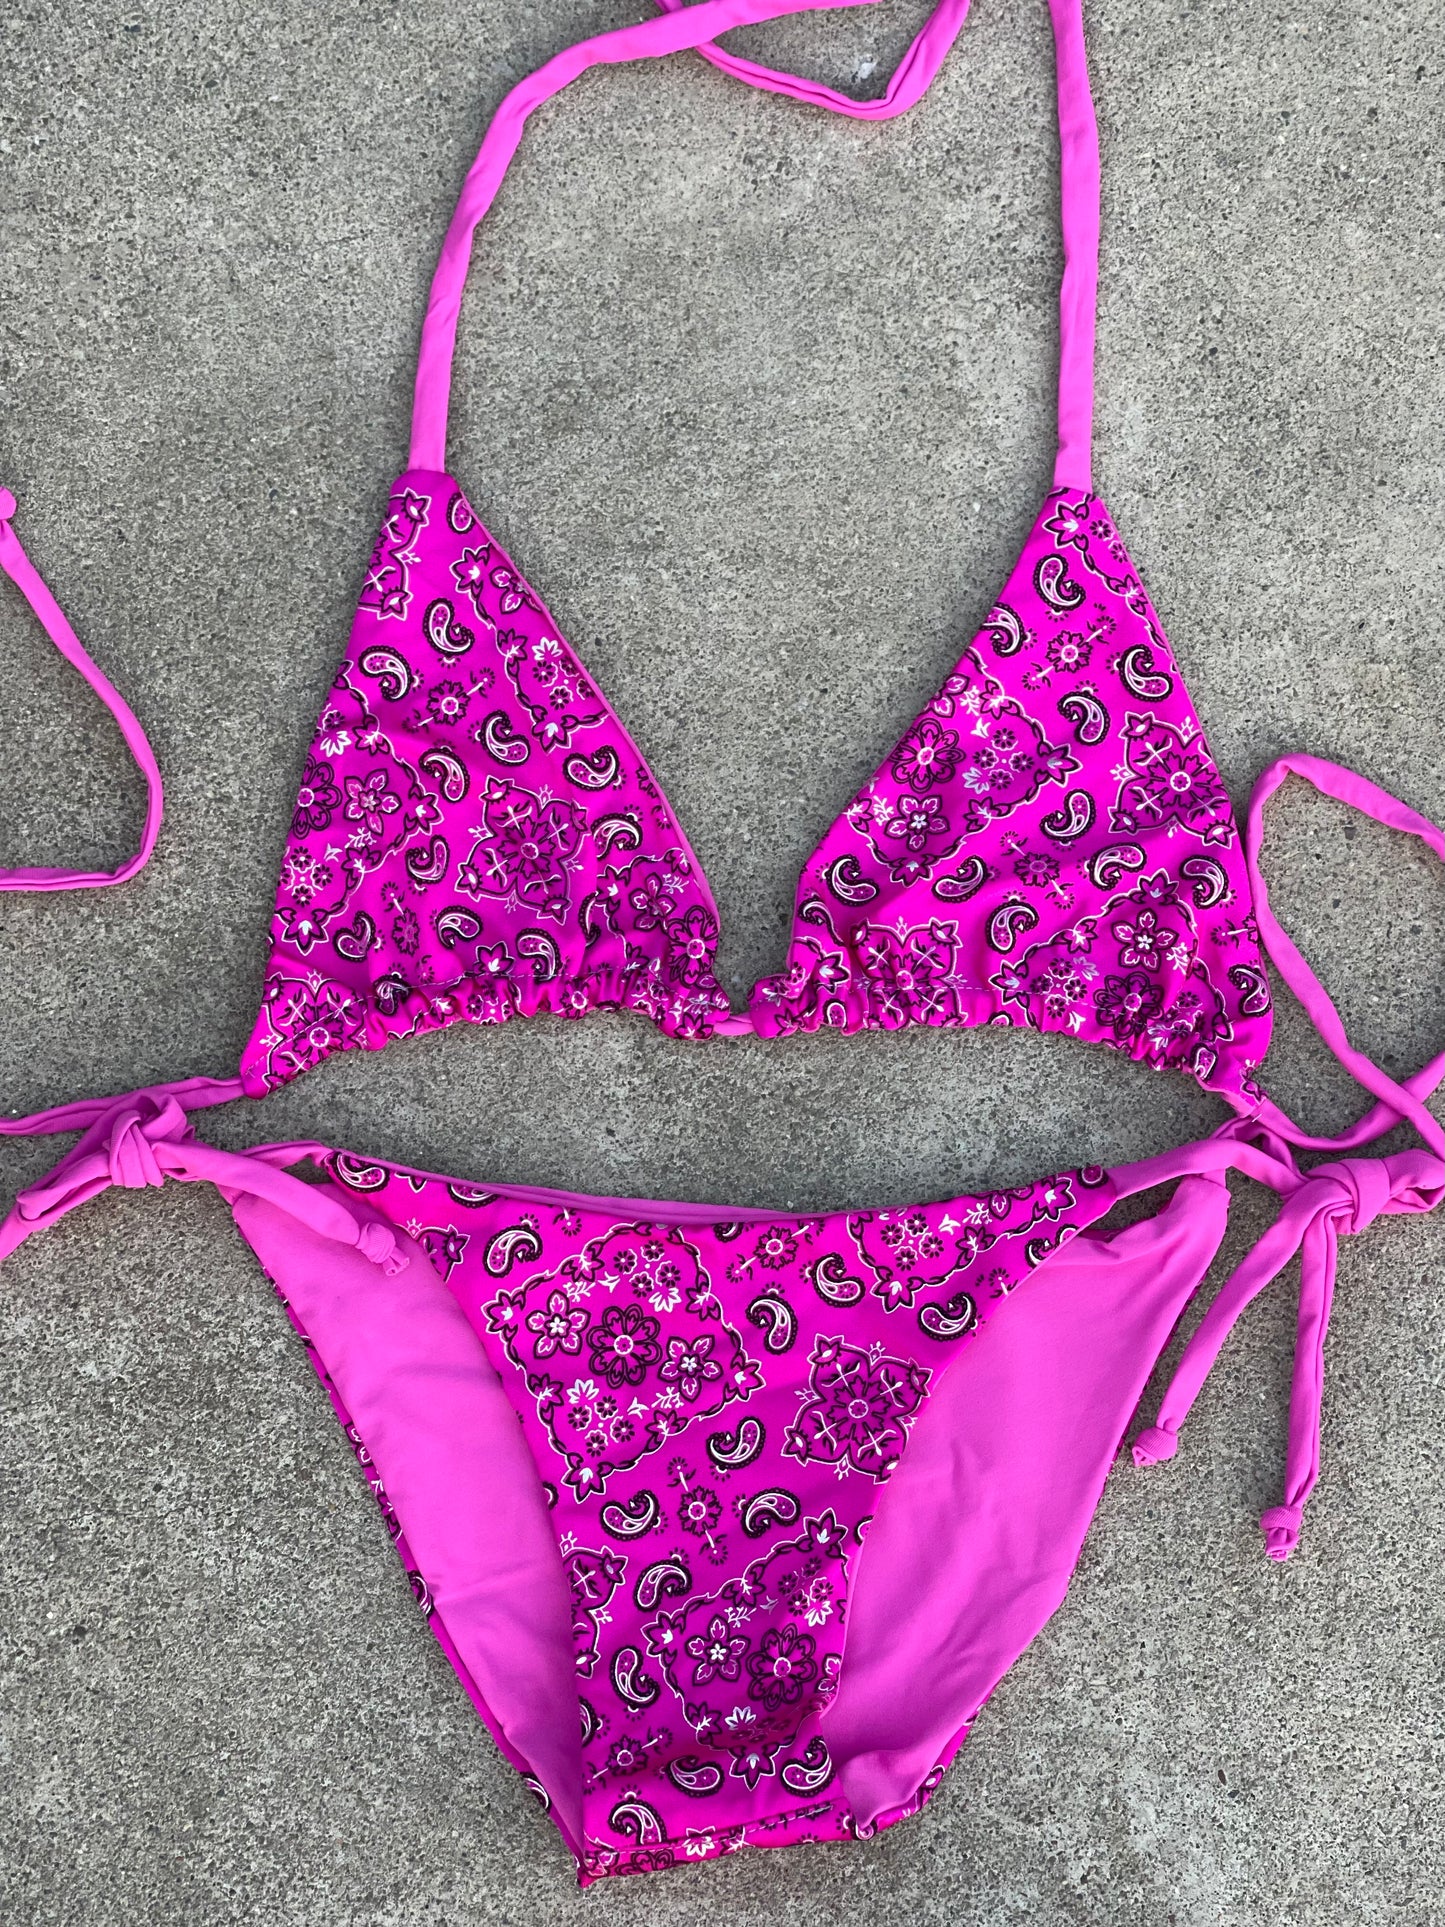 Pink Paisley Swimsuit